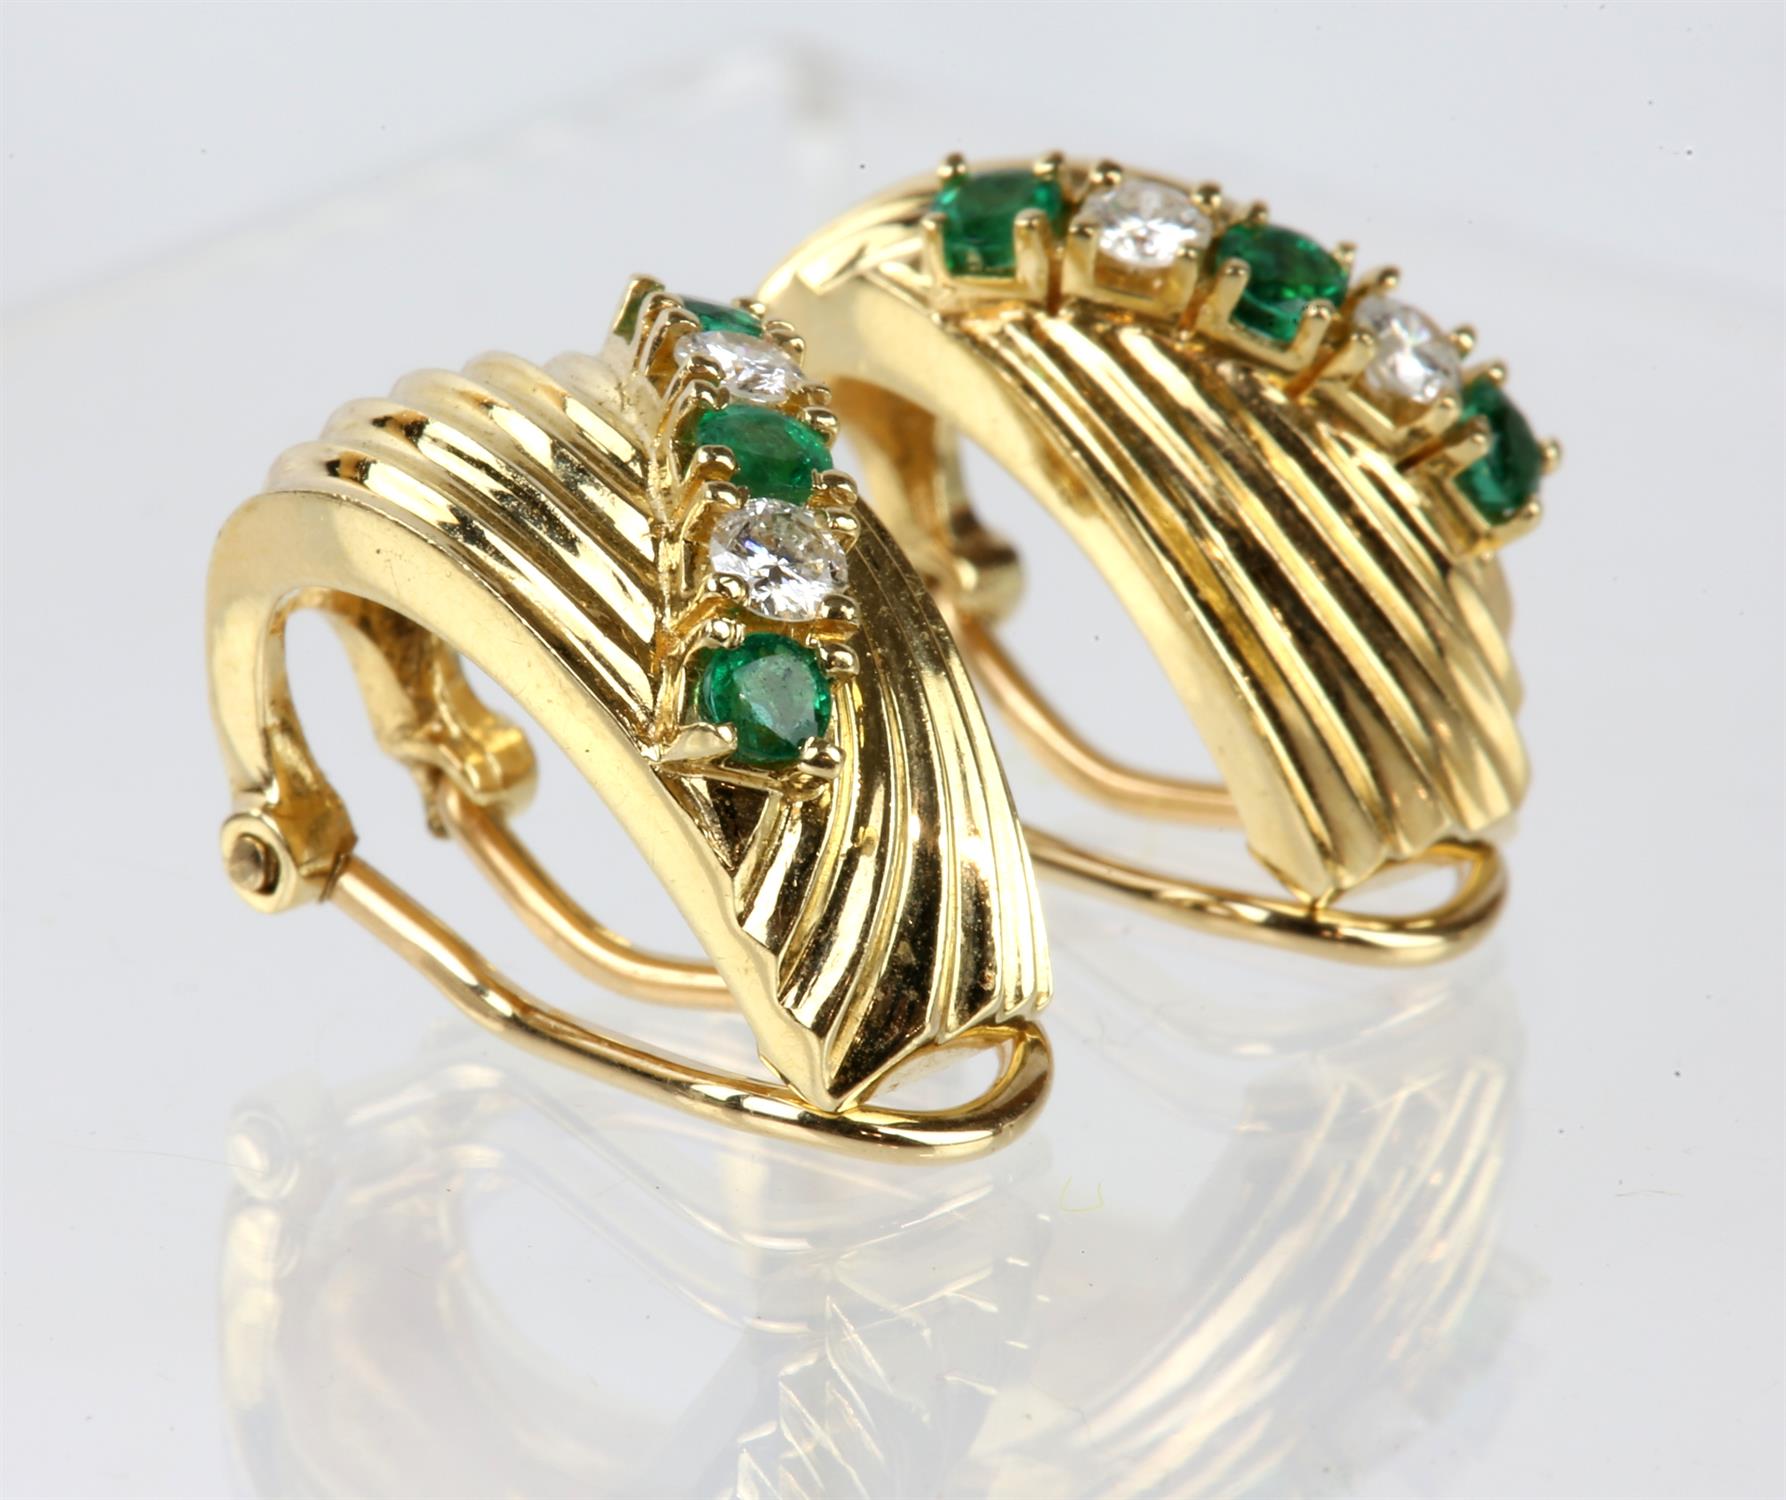 Pair of emerald and diamond clip-on earrings, each earring consisting of three round cut emeralds - Image 3 of 4